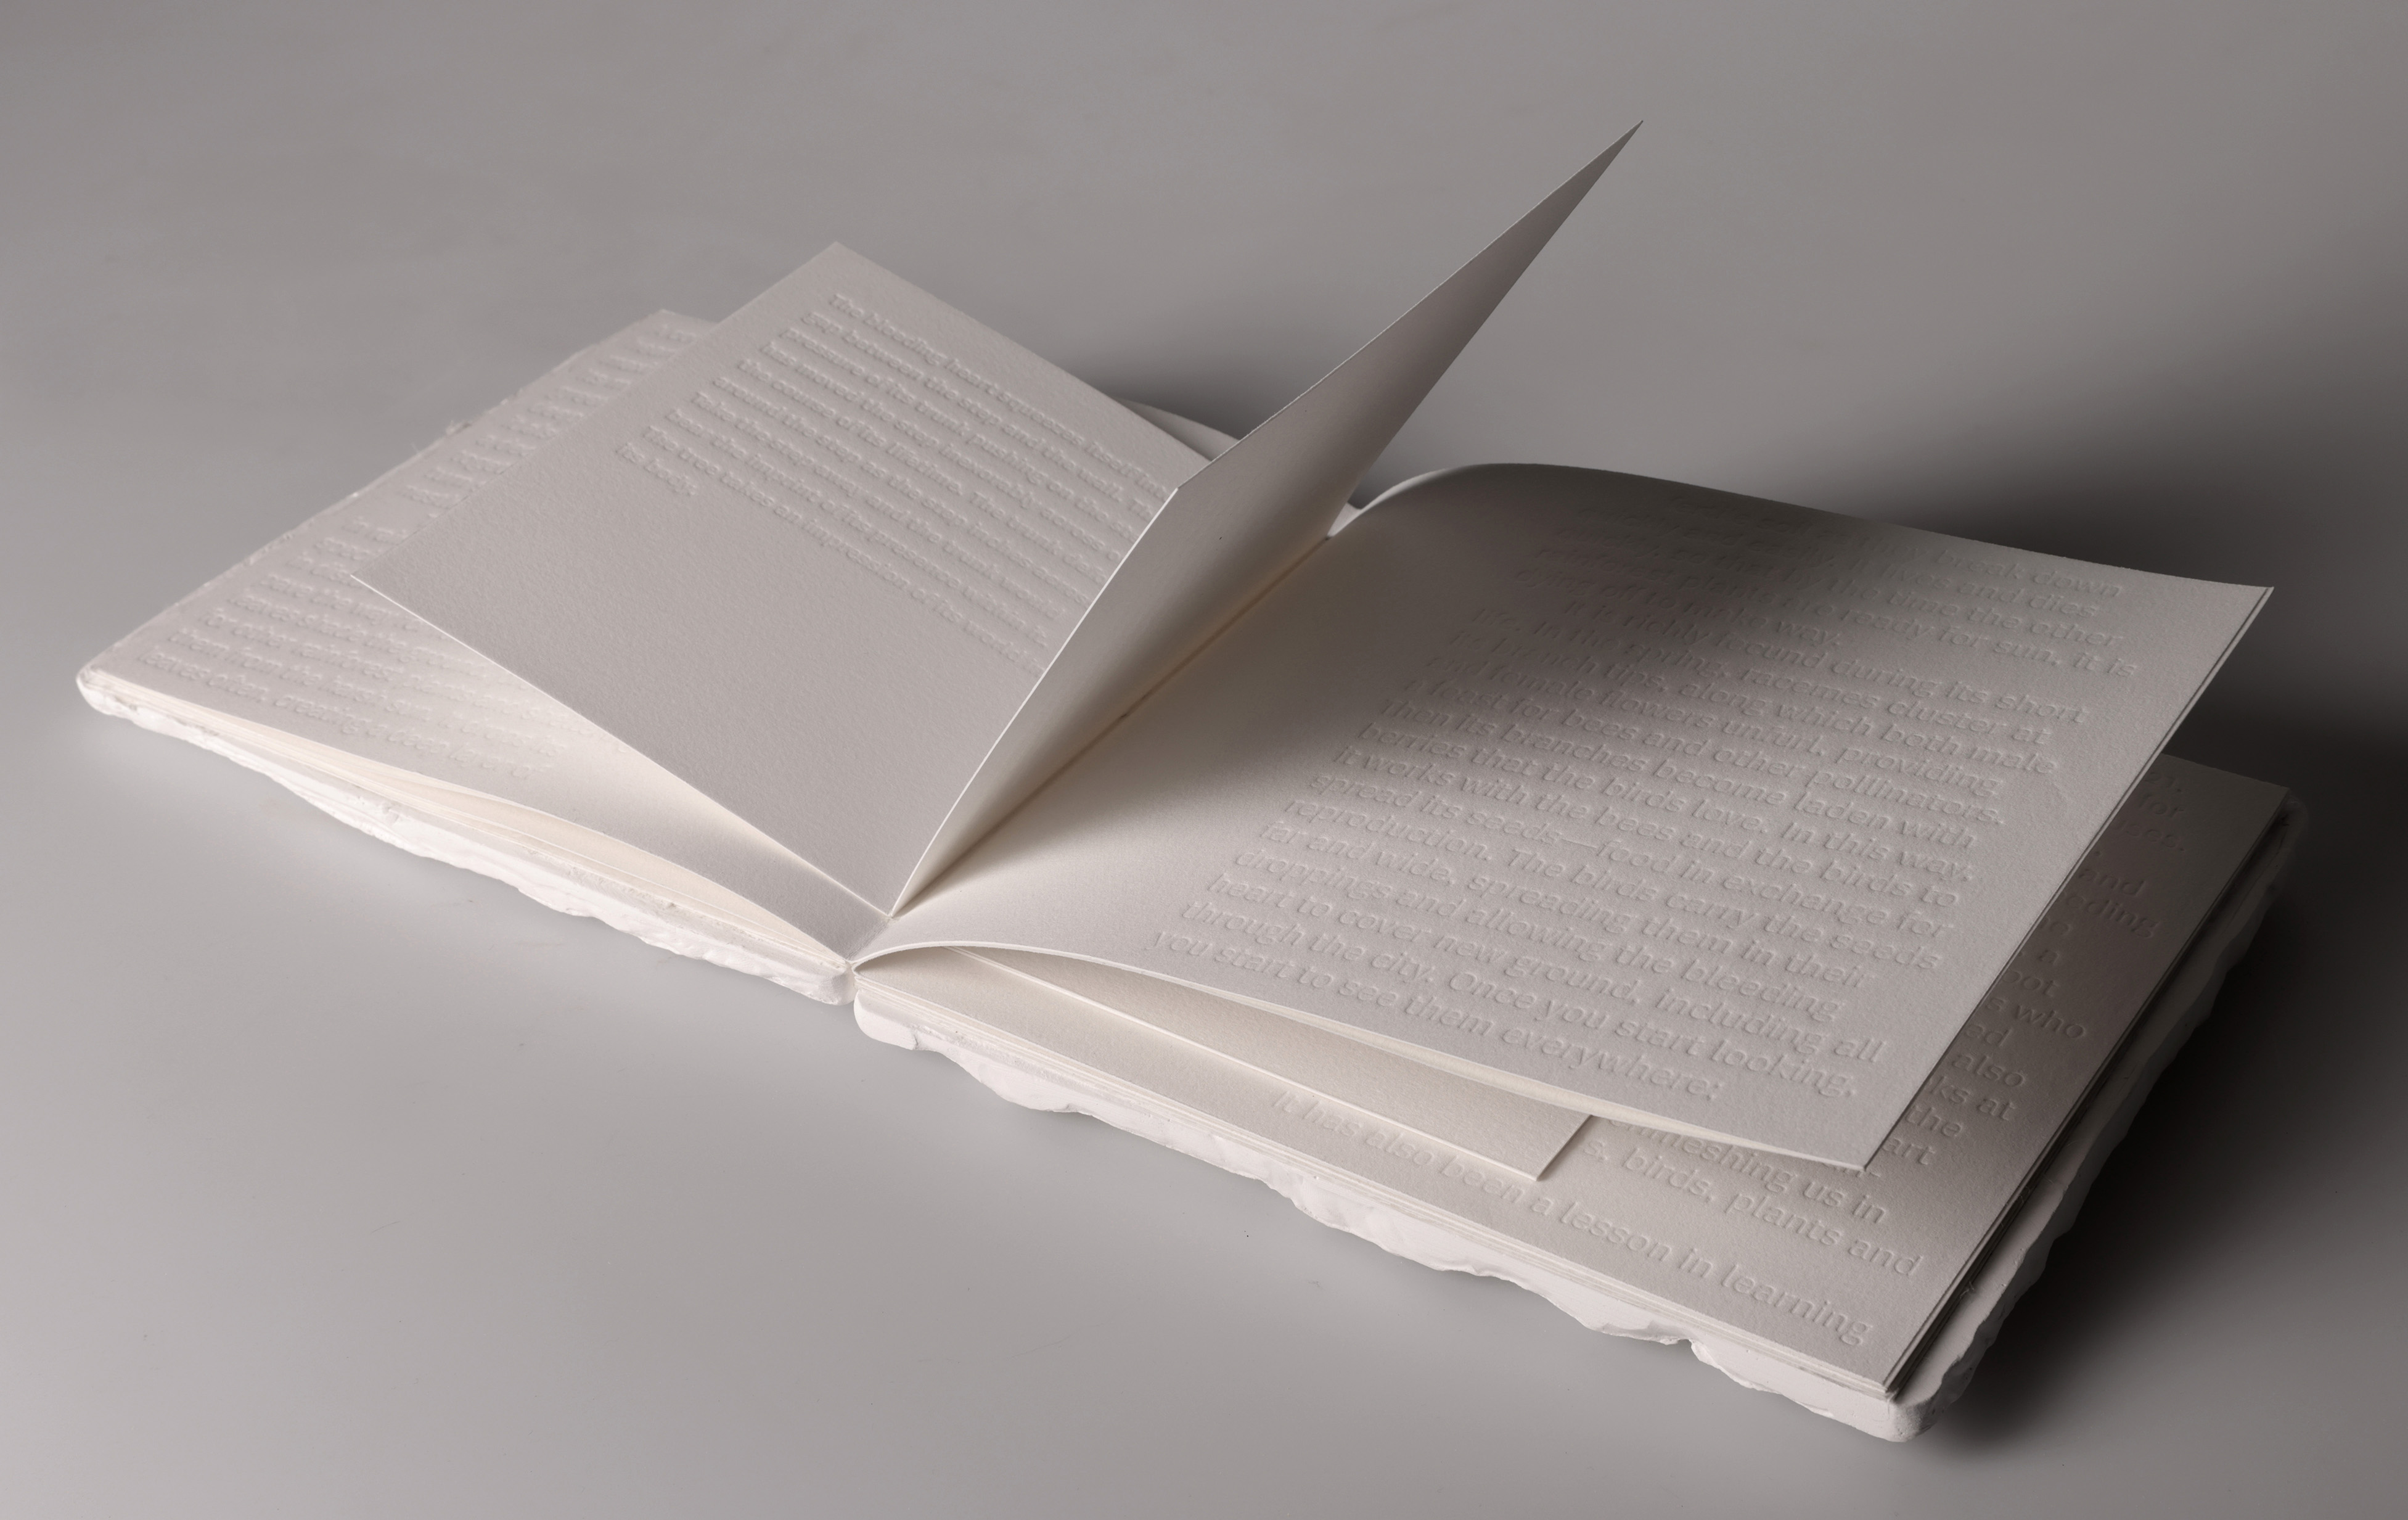 A white book with large text embossed pages.